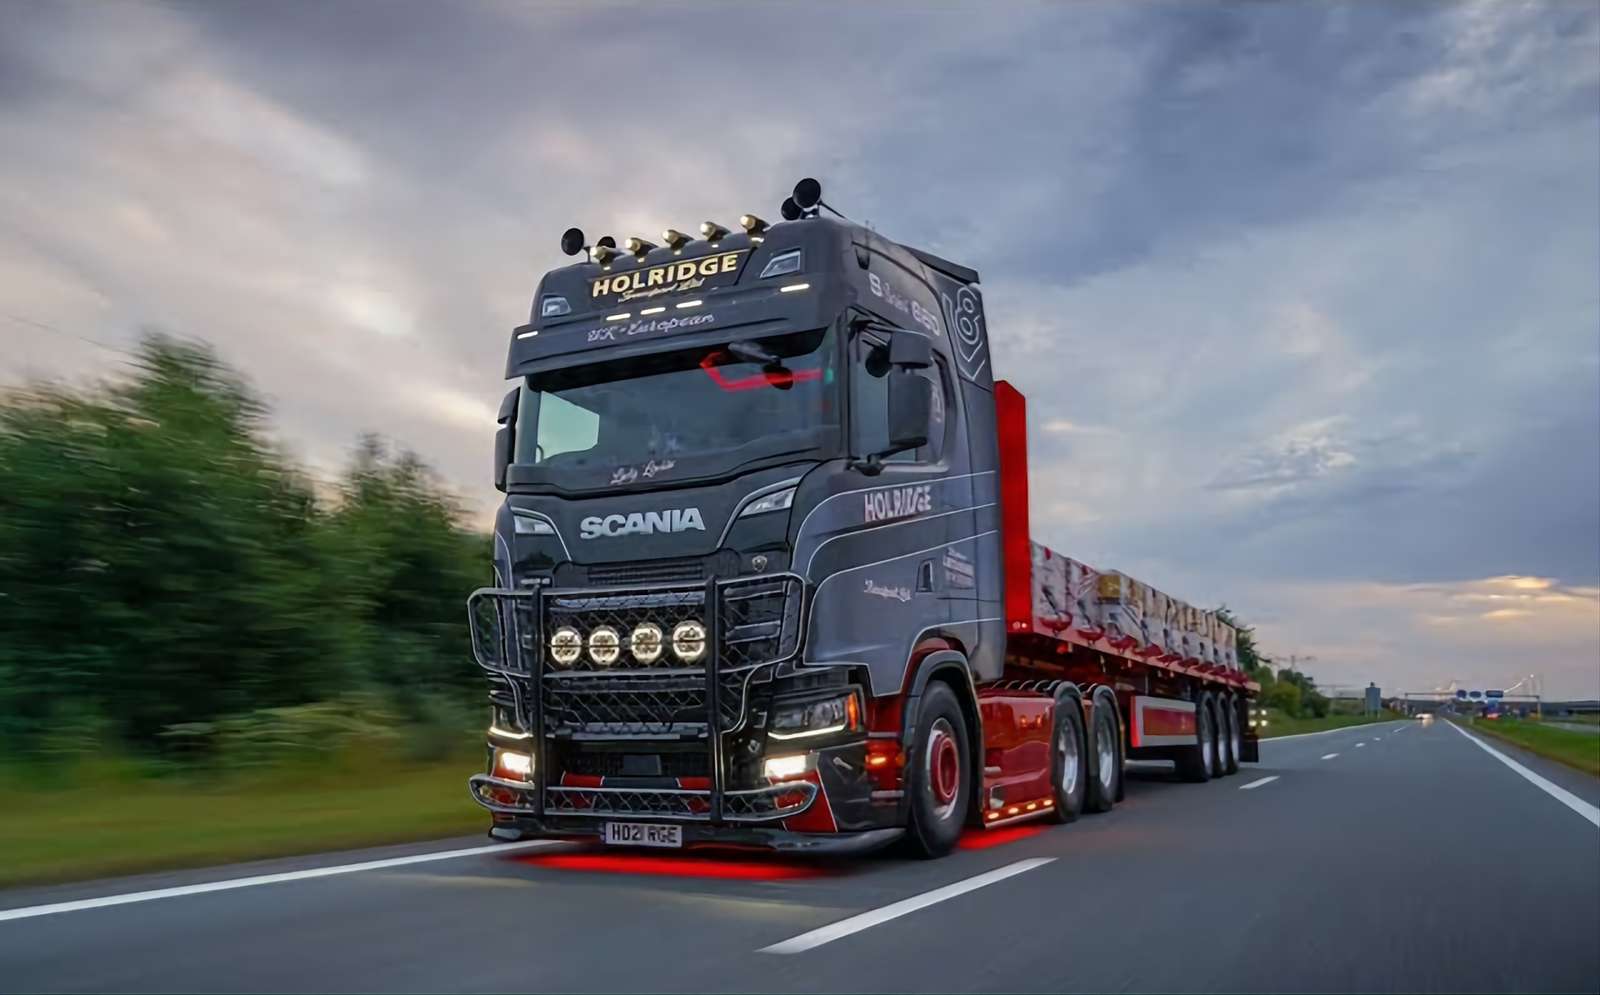 Holridge Scania V8 puzzle online from photo